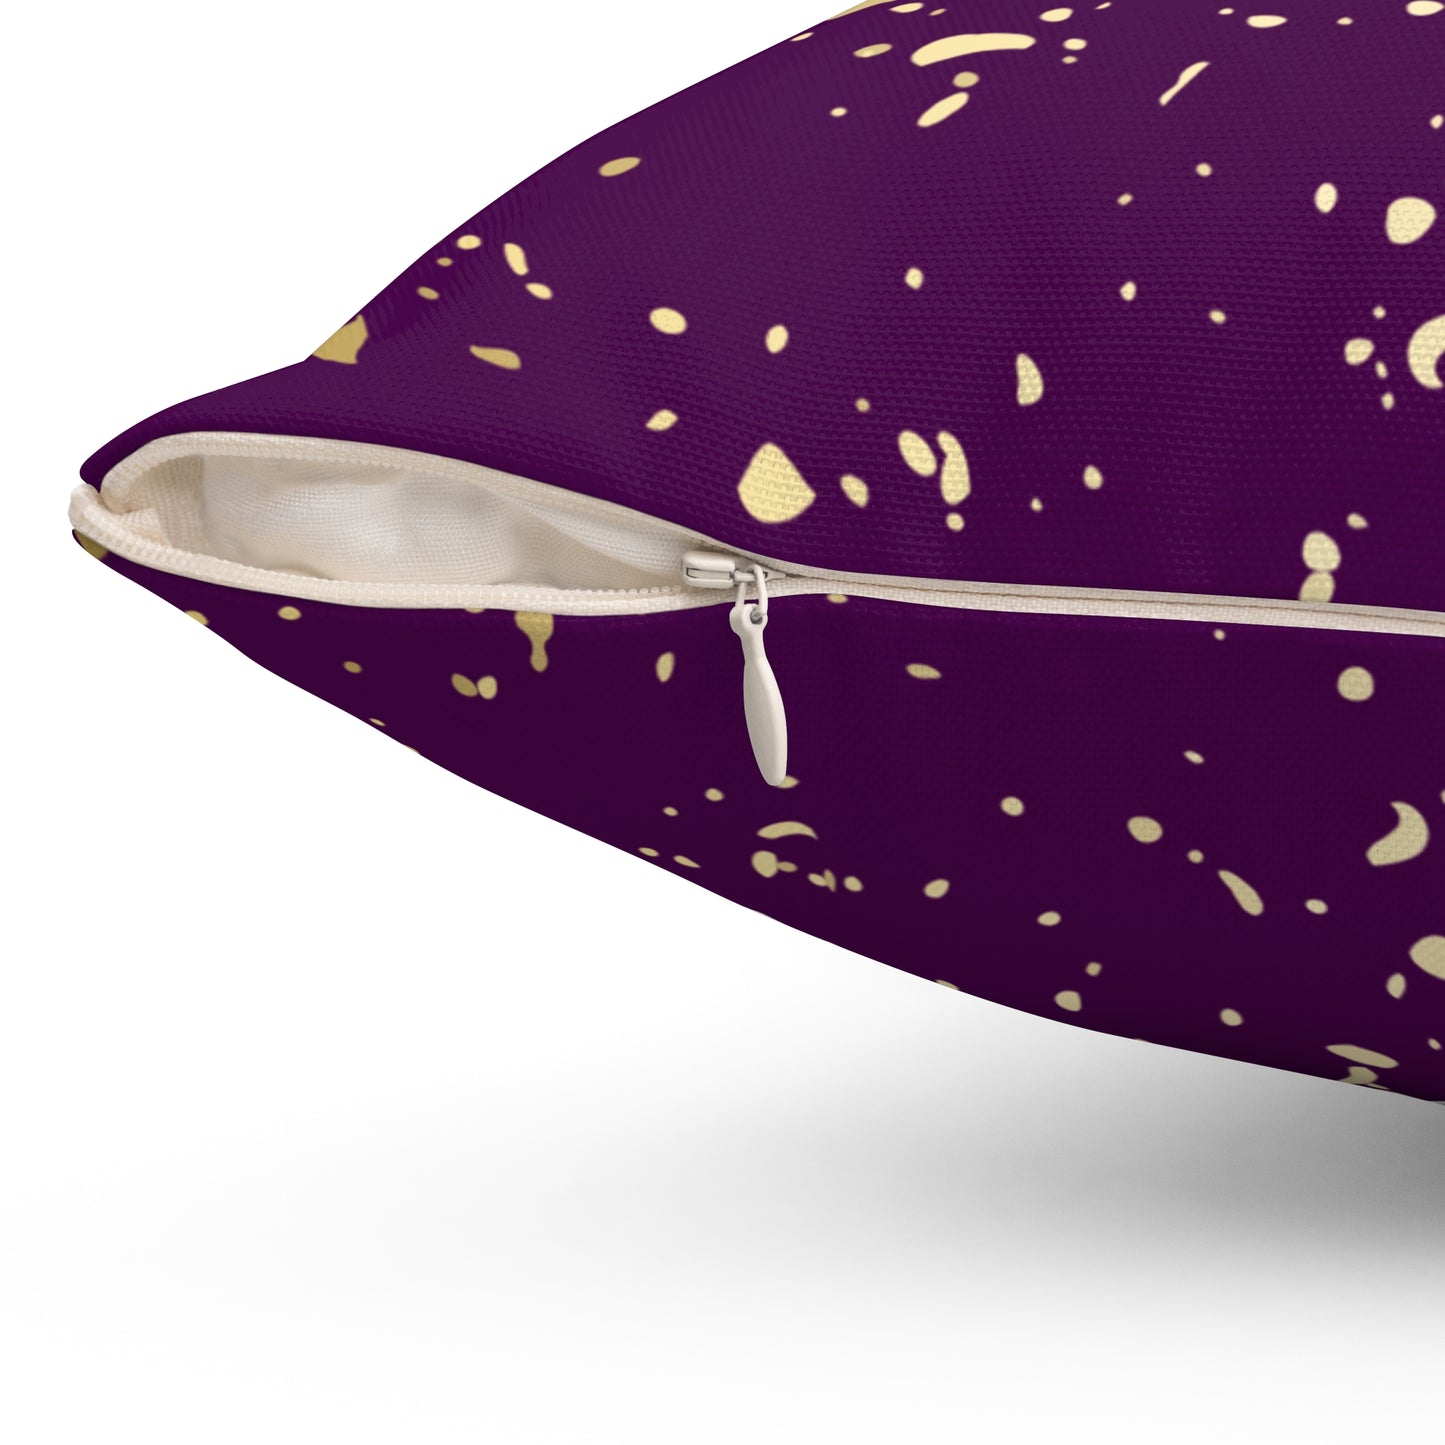 Eggplant and Gold Flakes Throw Pillow